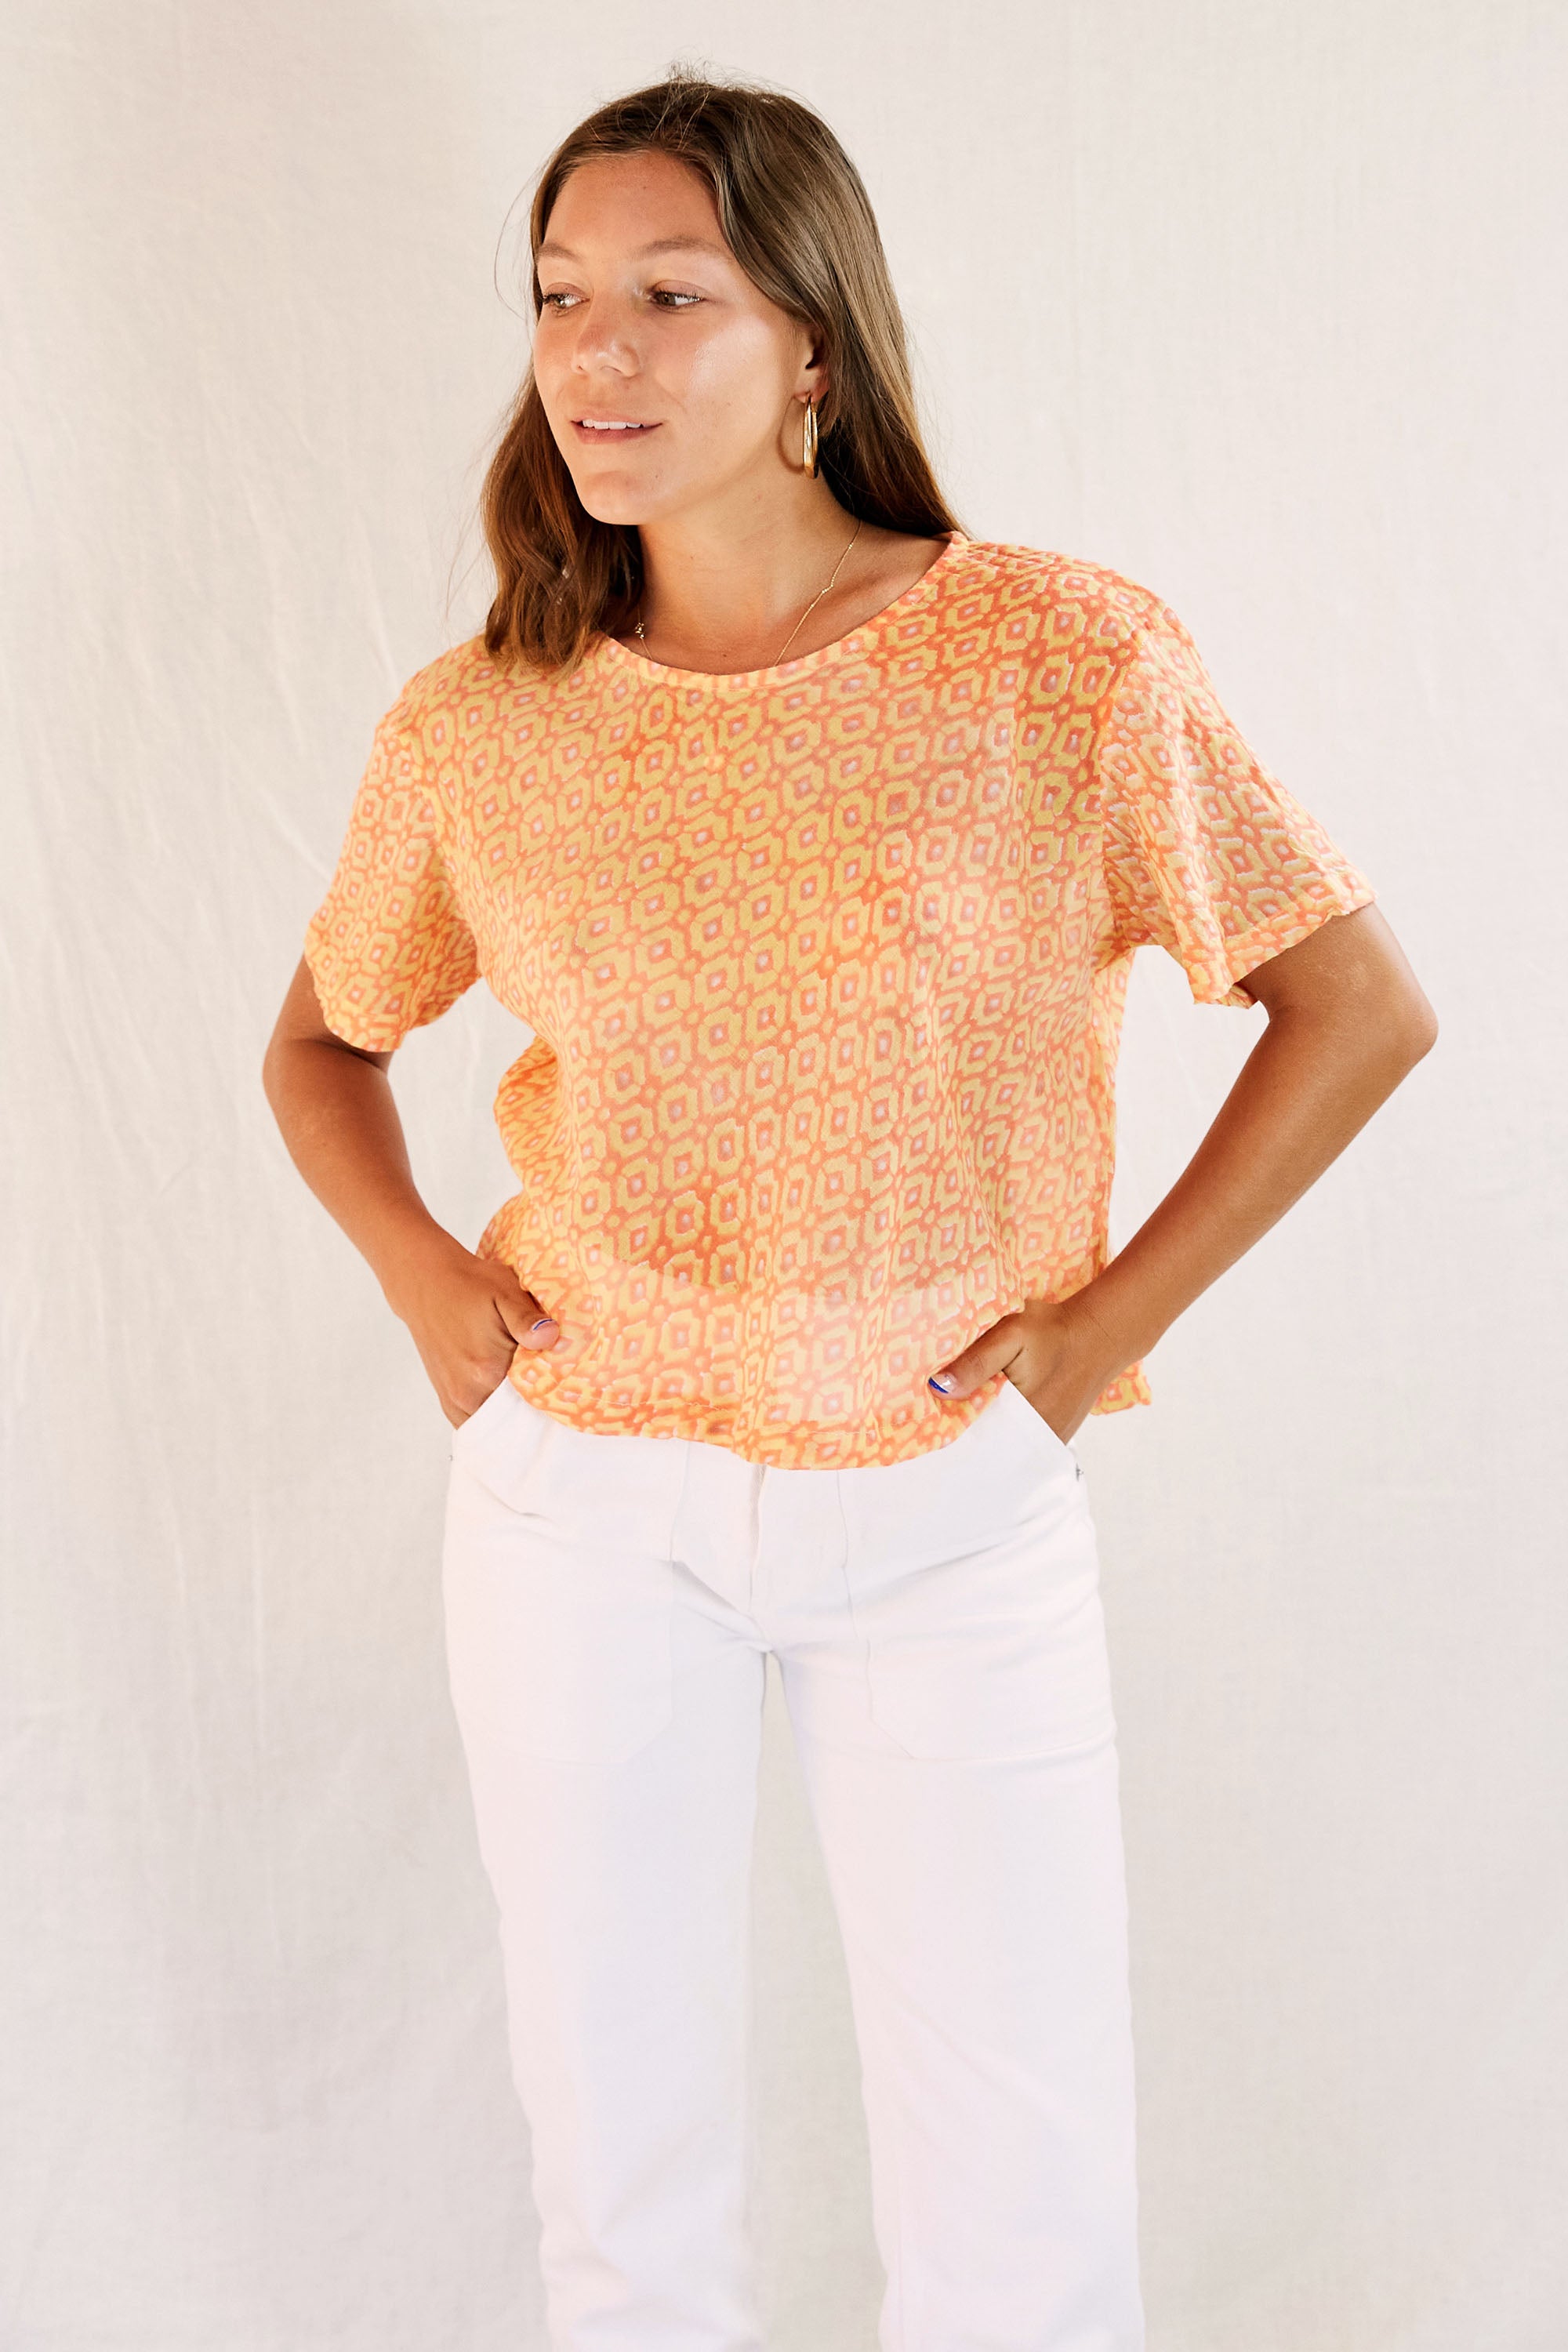 Model wearing the Sophie Top with white pants against a cream backdrop